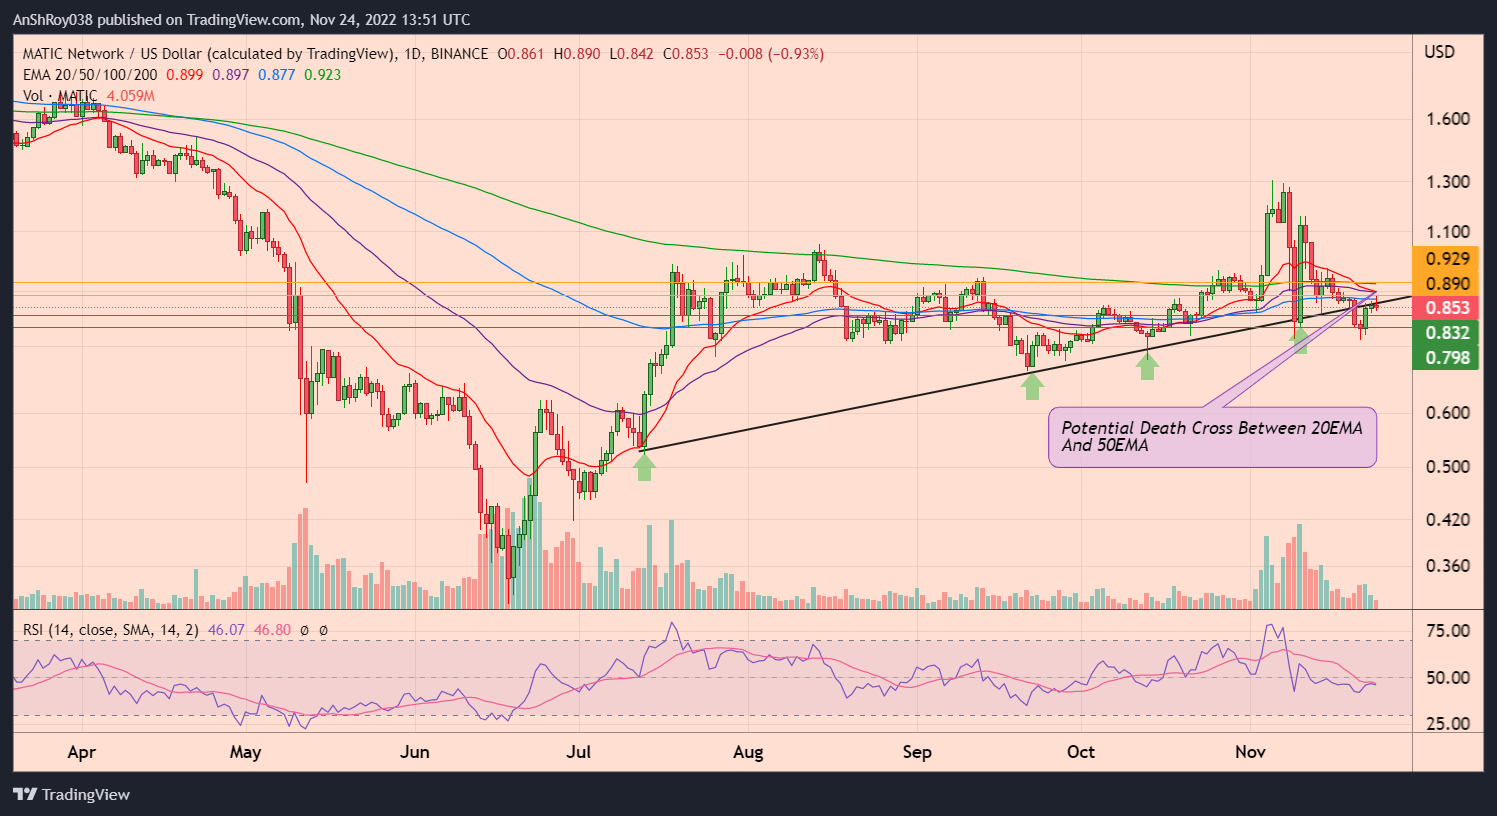 MATICUSD daily chart with RSI and a potential death cross